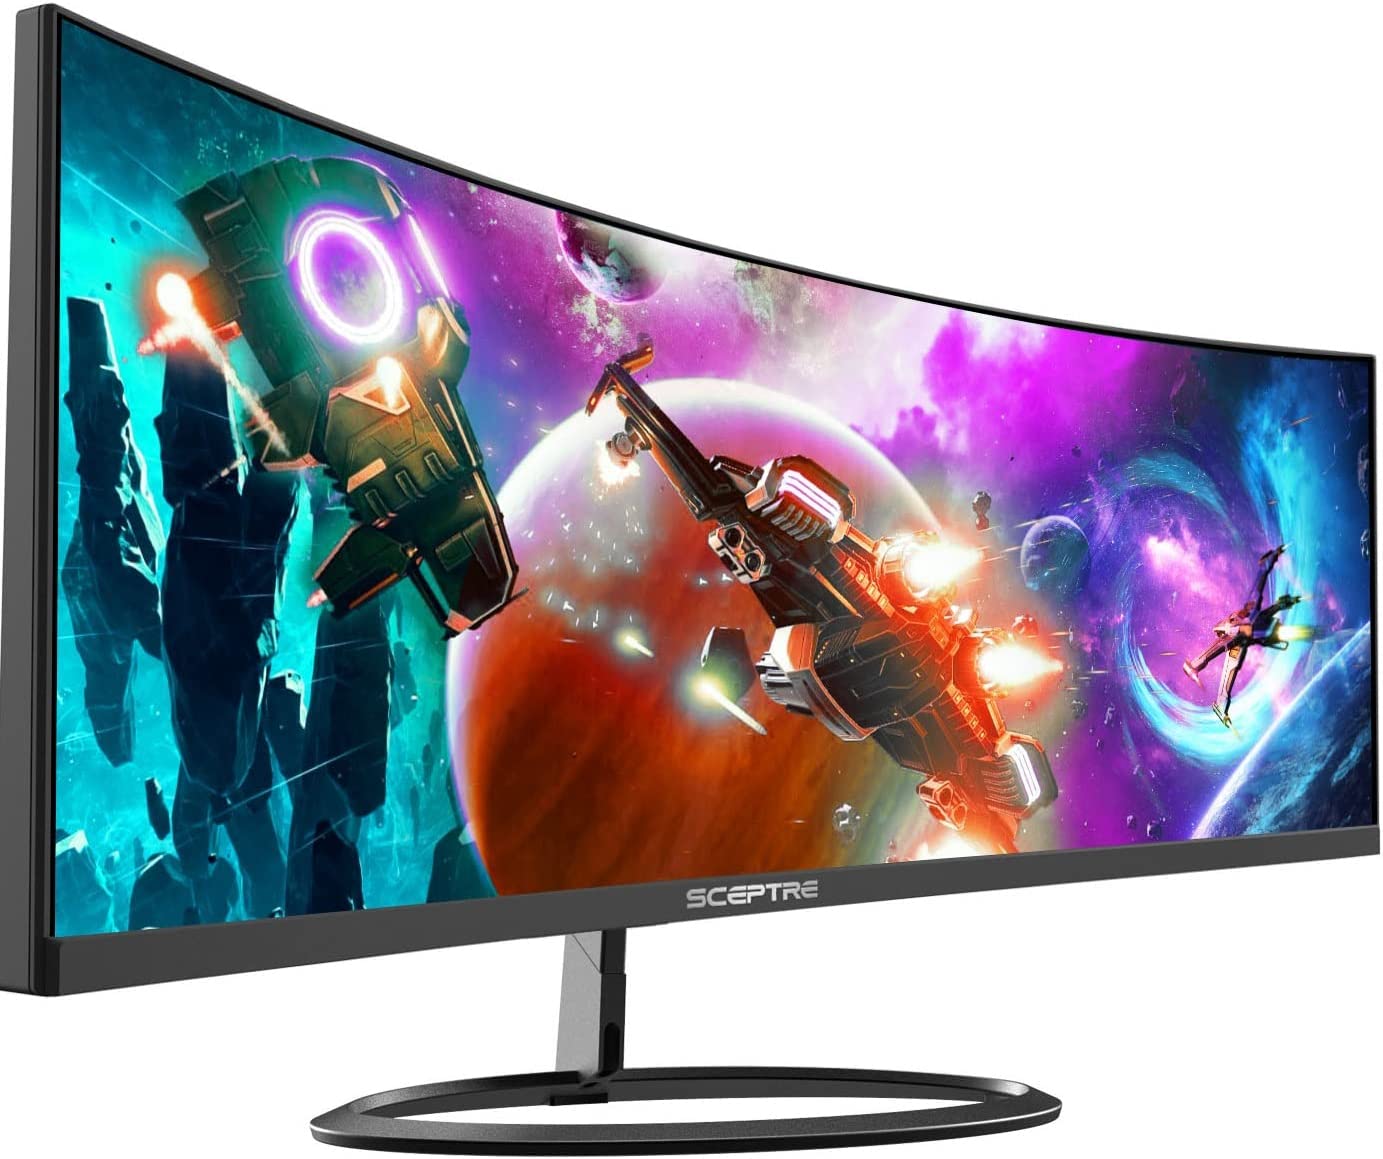 Sceptre Curved 30 21-9 Gaming LED Monitor 2560x1080p UltraWide Ultra Slim HDMI DisplayPort Up to 85Hz MPRT 1ms FPS-RTS Build-in Speakers